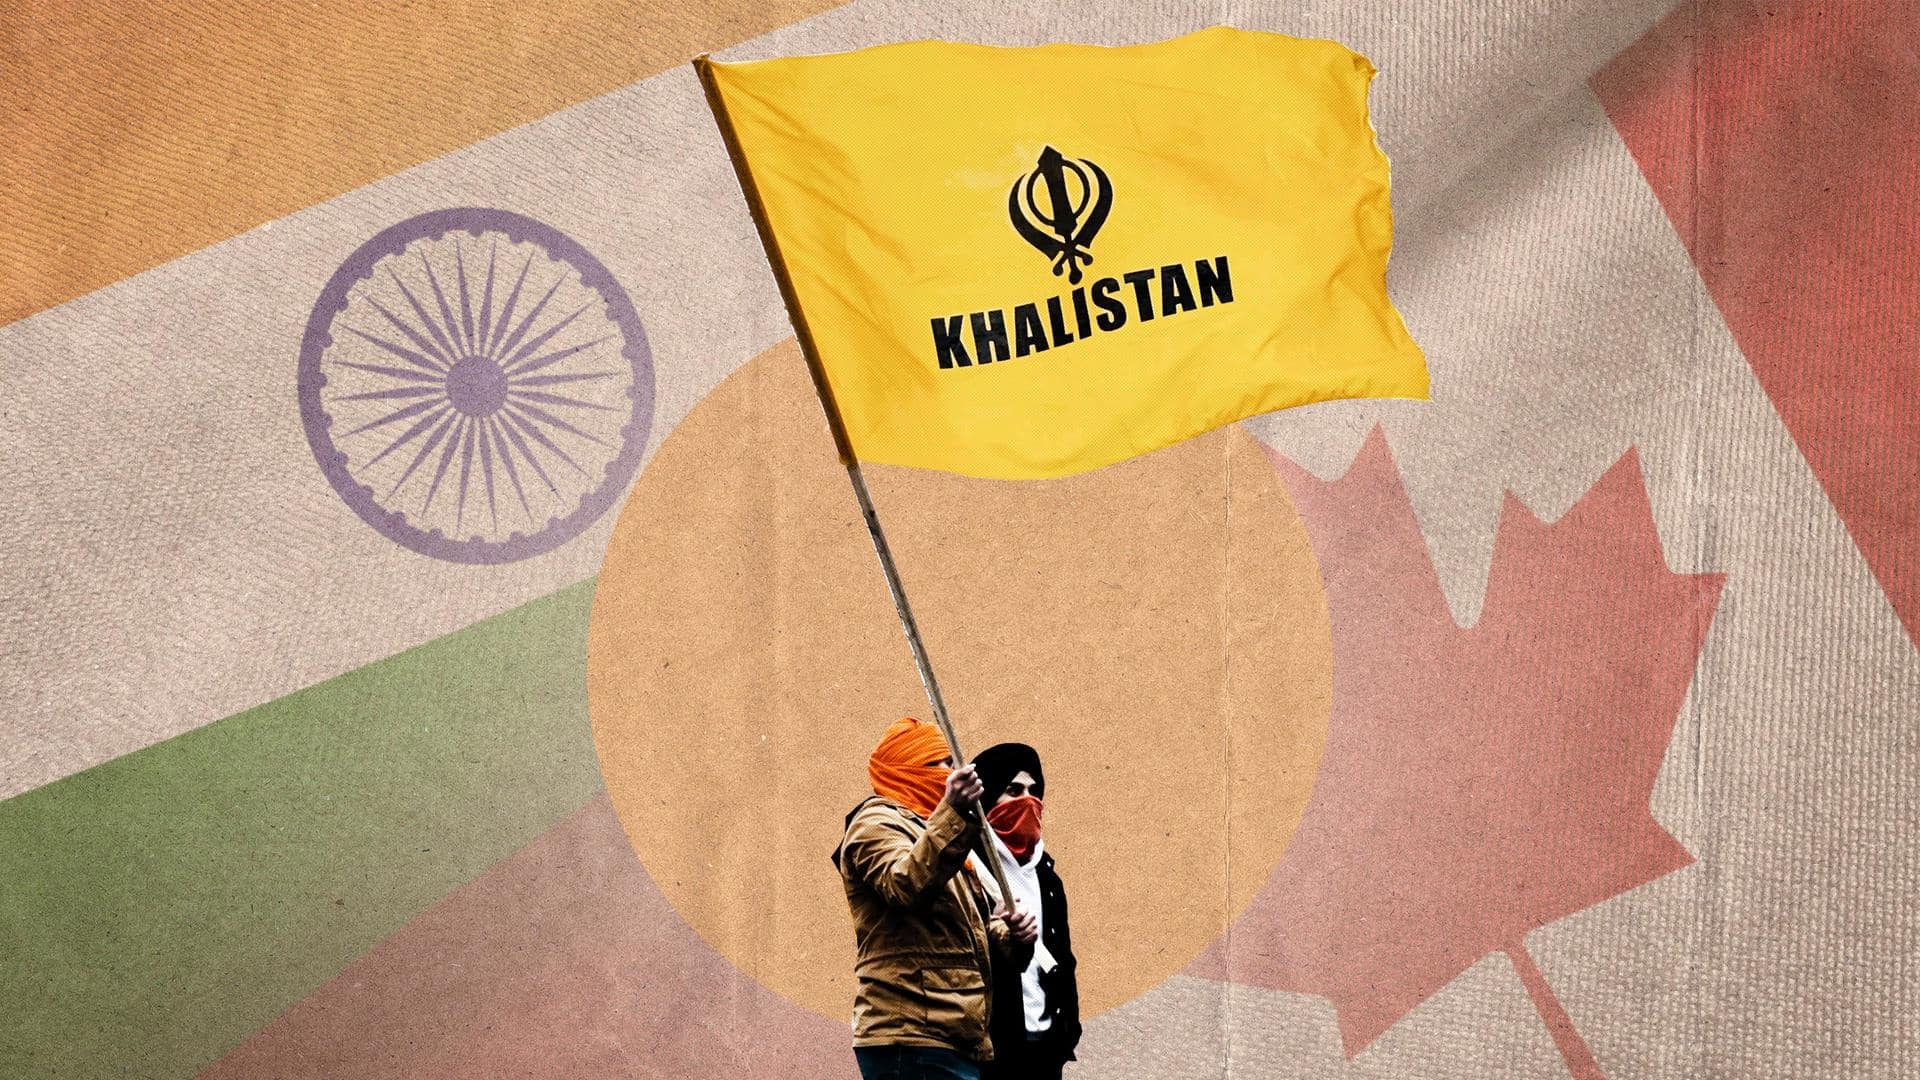 India flags concern over 'Khalistan freedom rally' in Canada